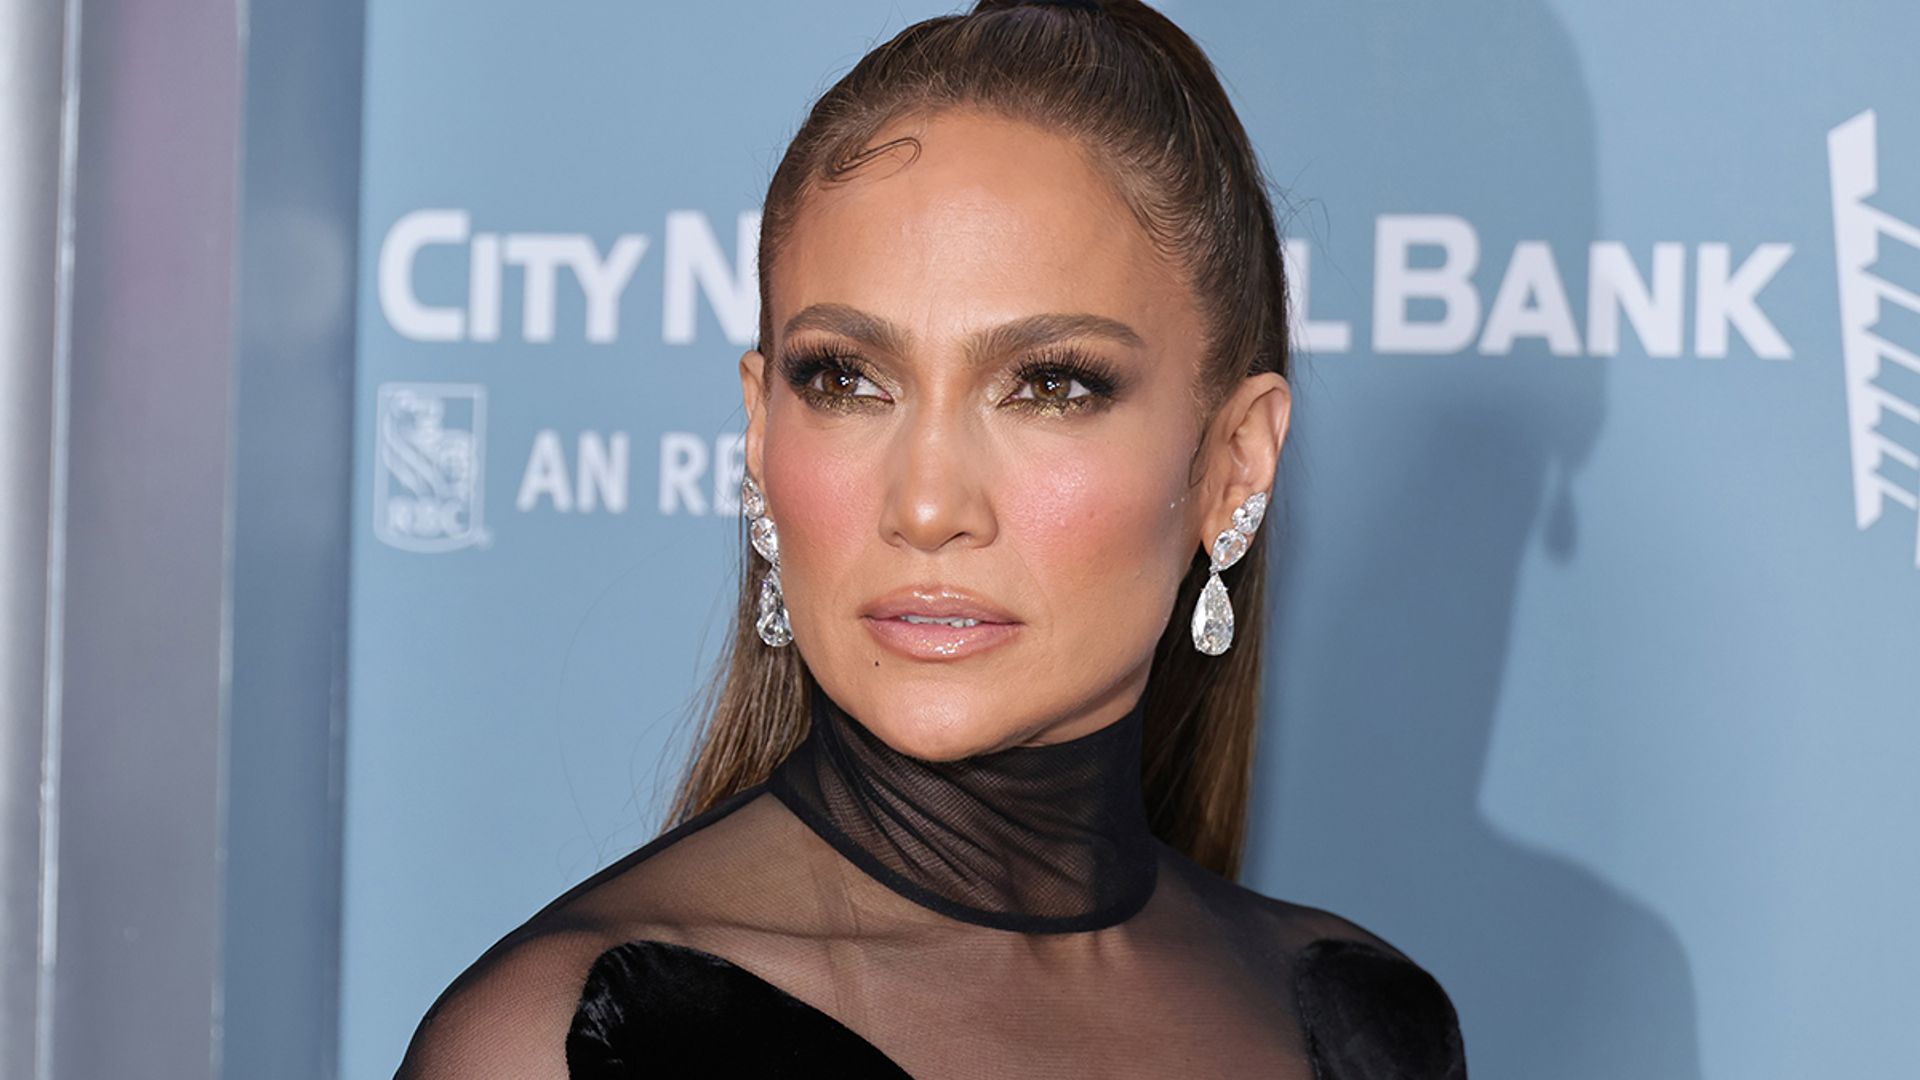 Jennifer Lopez looks out of this world in leg baring dress for the launch of her shoe line